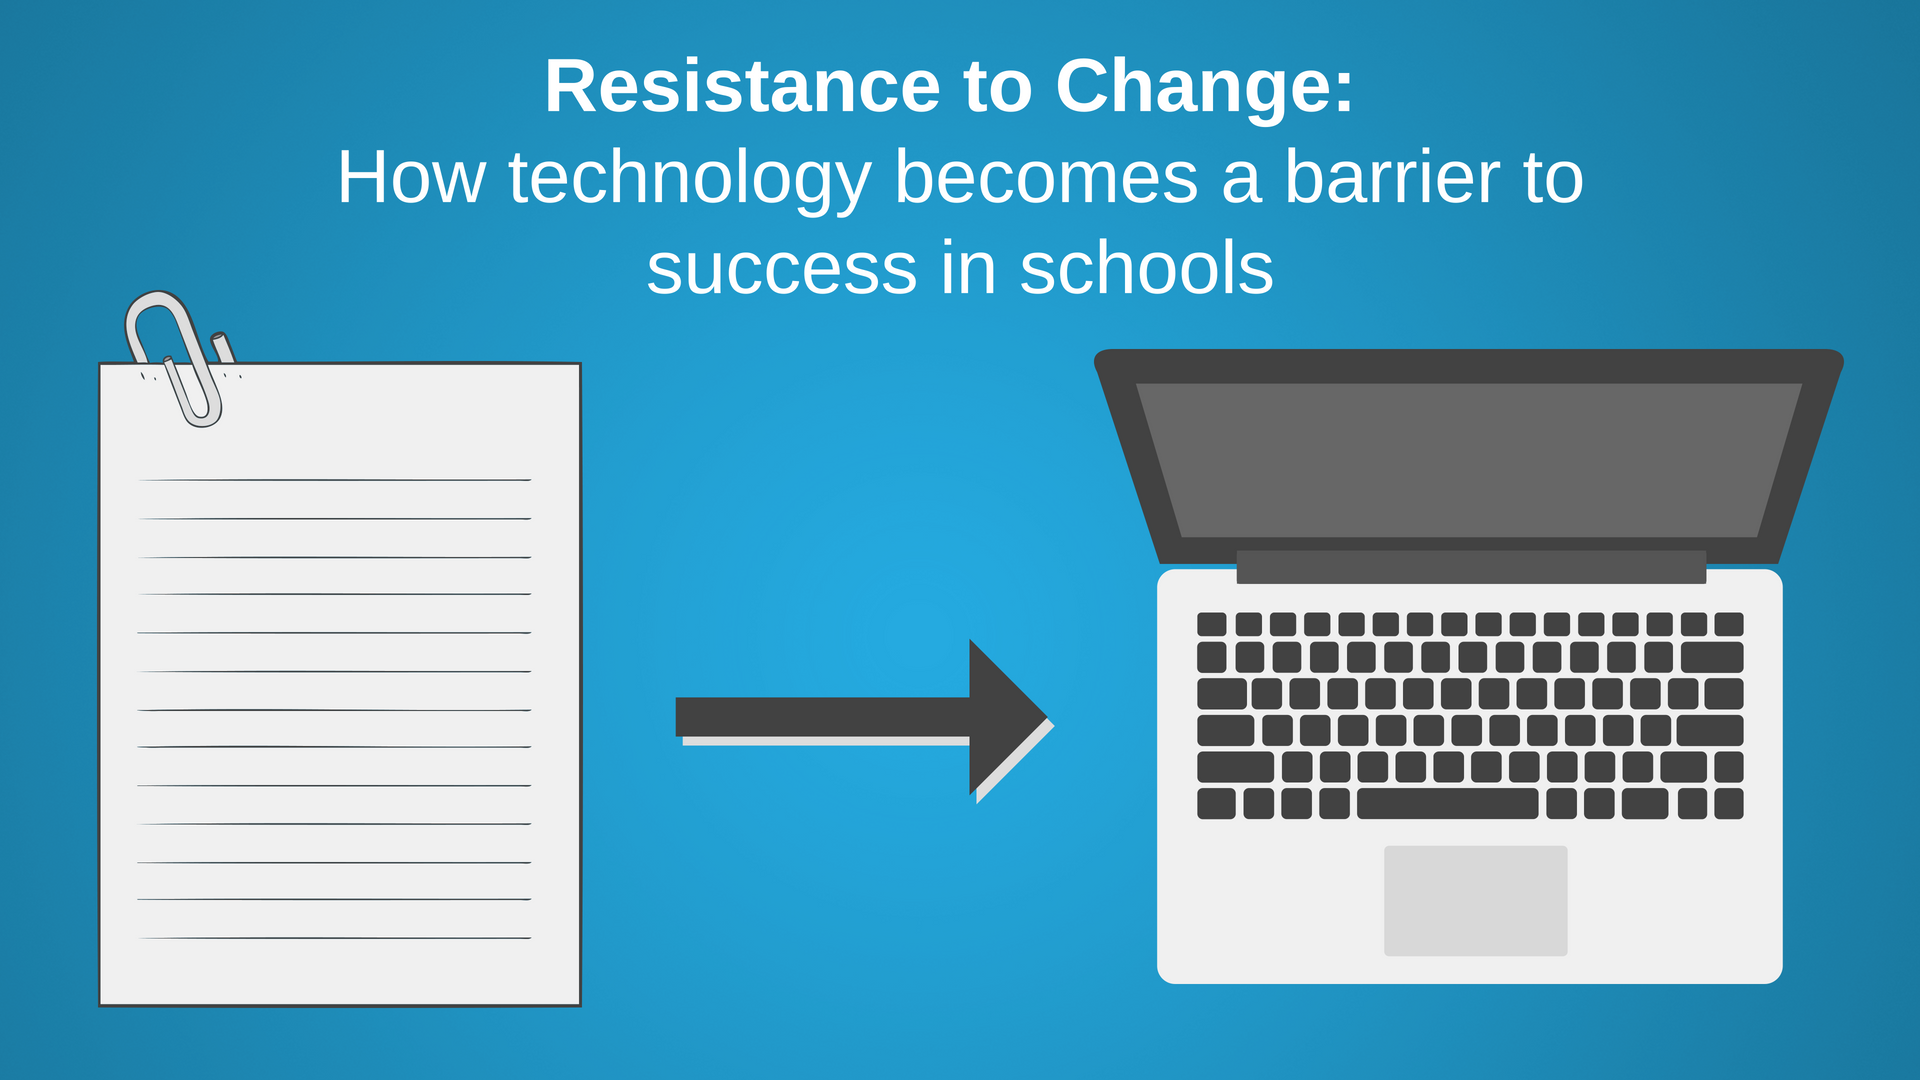 Resistance to Change: How technology becomes a barrier to success in schools